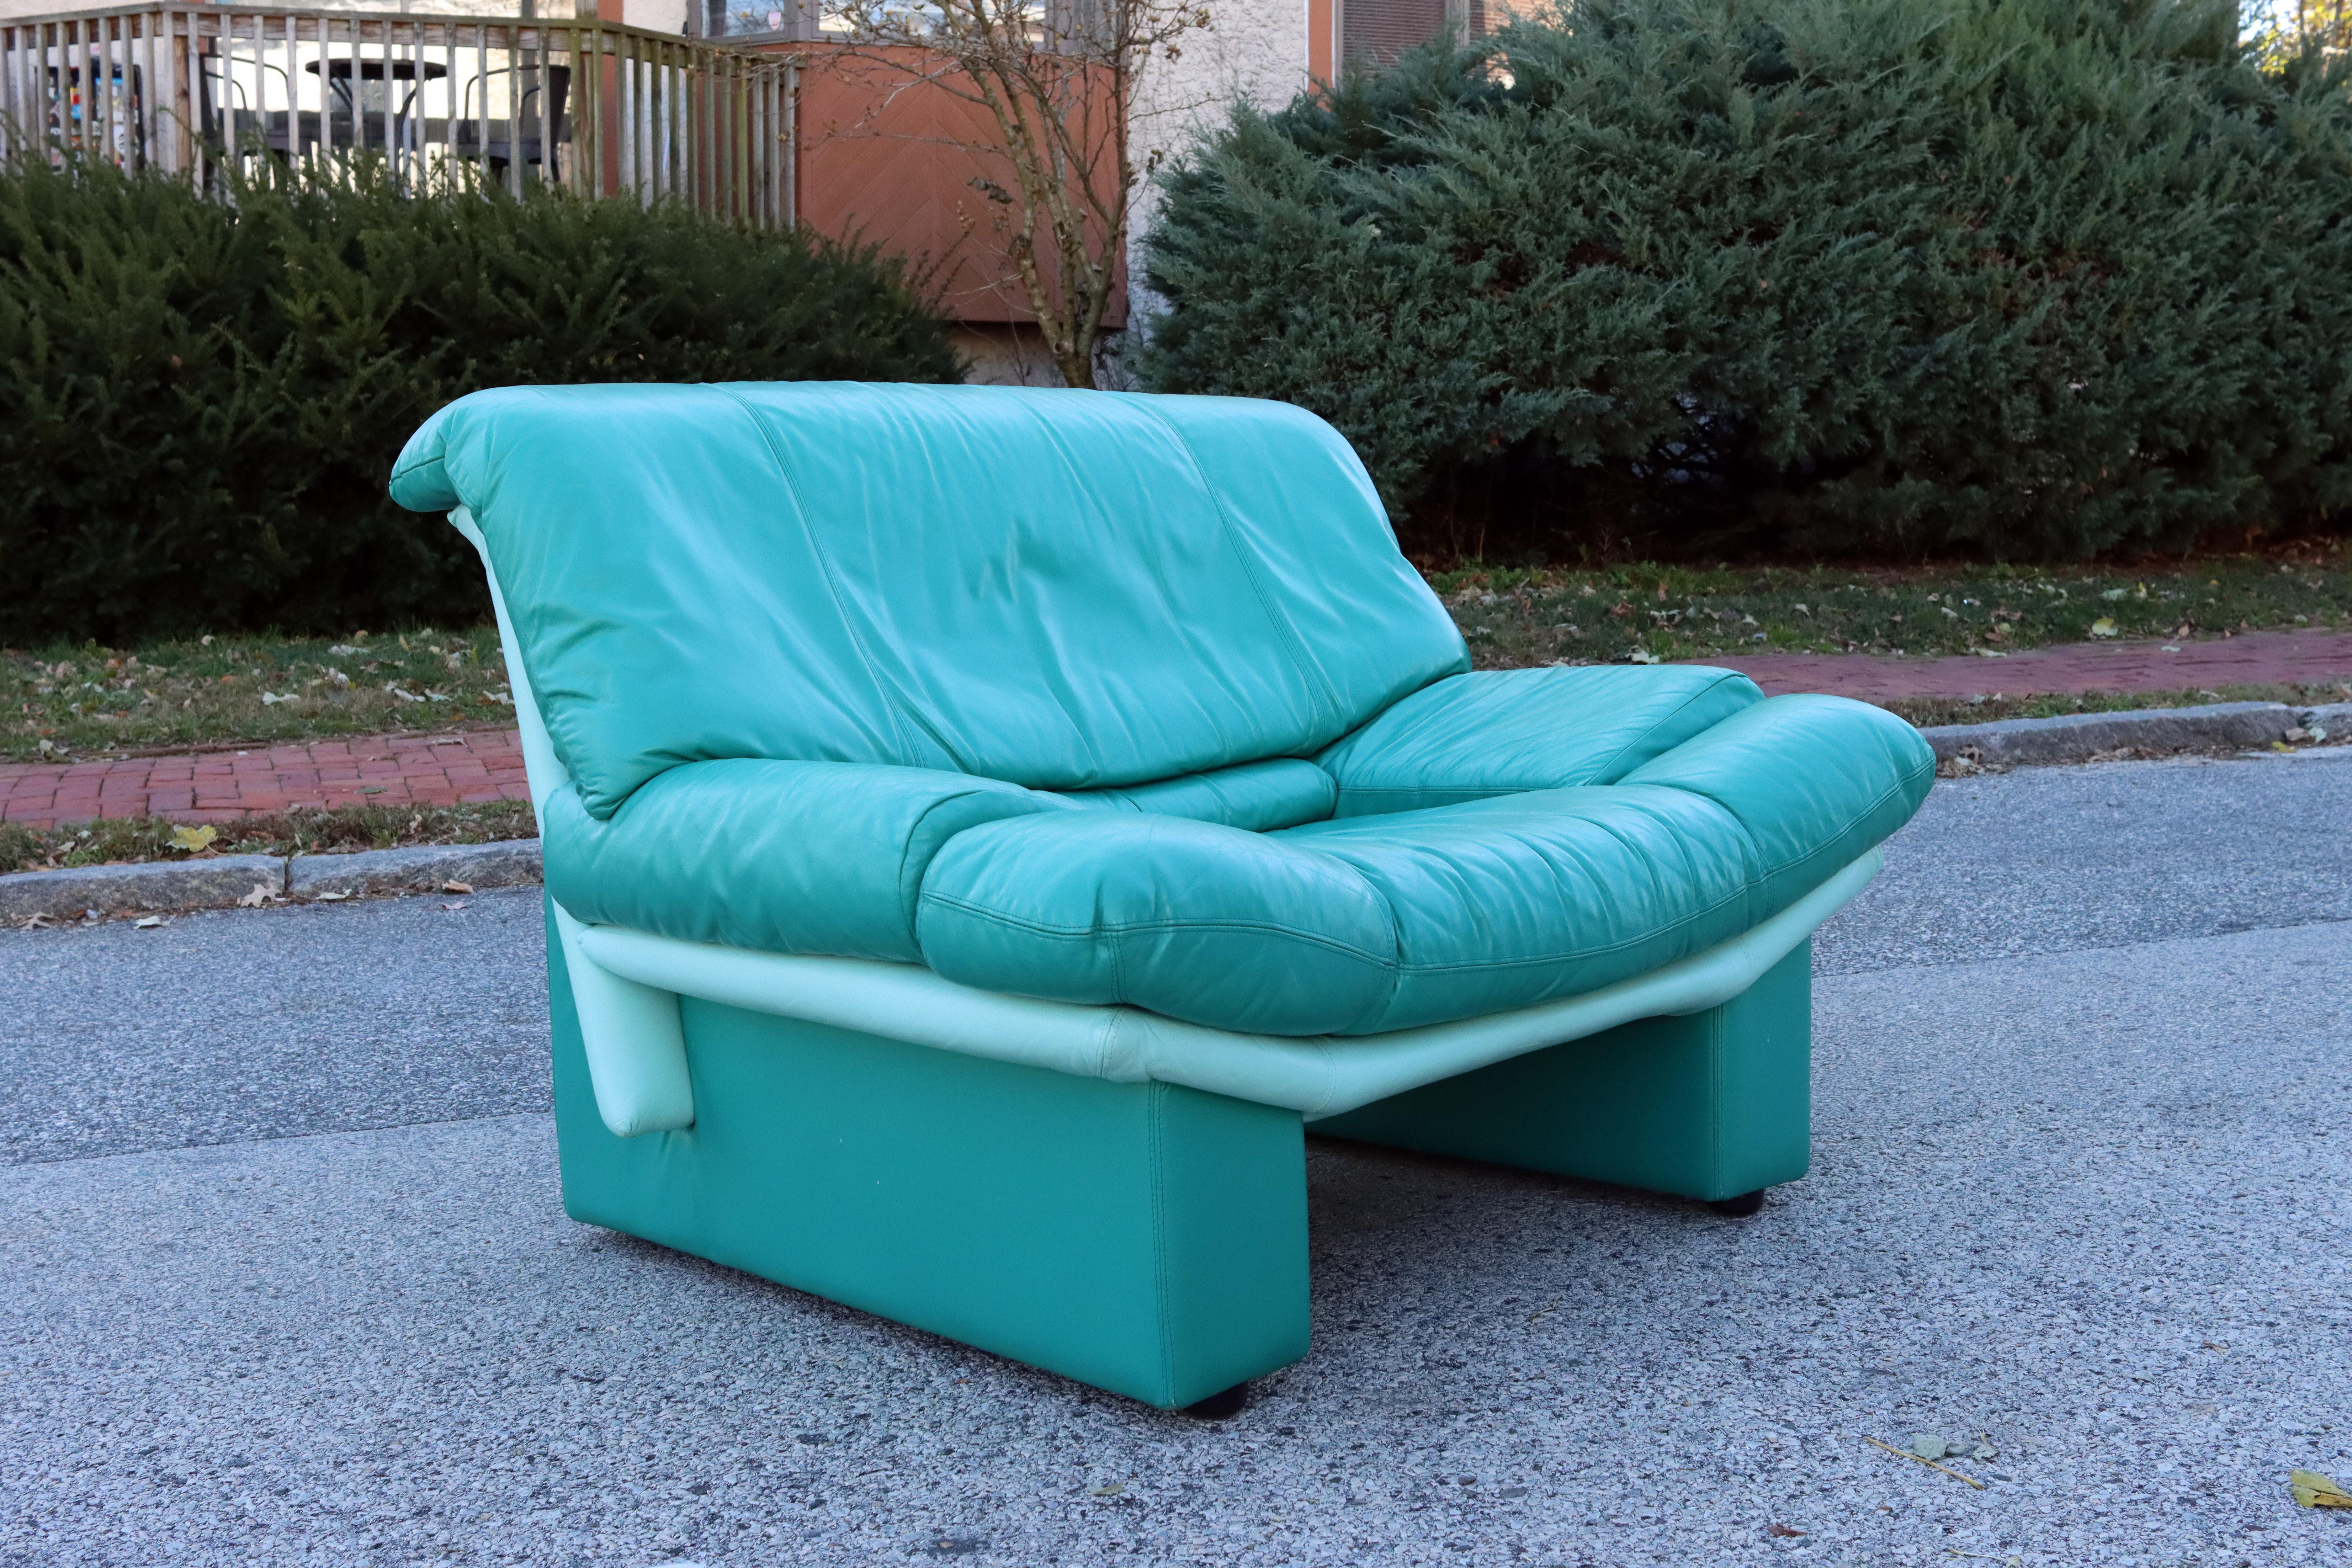 A vintage Alpa Salotti club chair upholstered in vibrant teal leather. A brilliant pop of color to liven up your space. The leather is in excellent condition with no significant damage or wear. No dryness, cracking, or tears. Interior foam is soft.